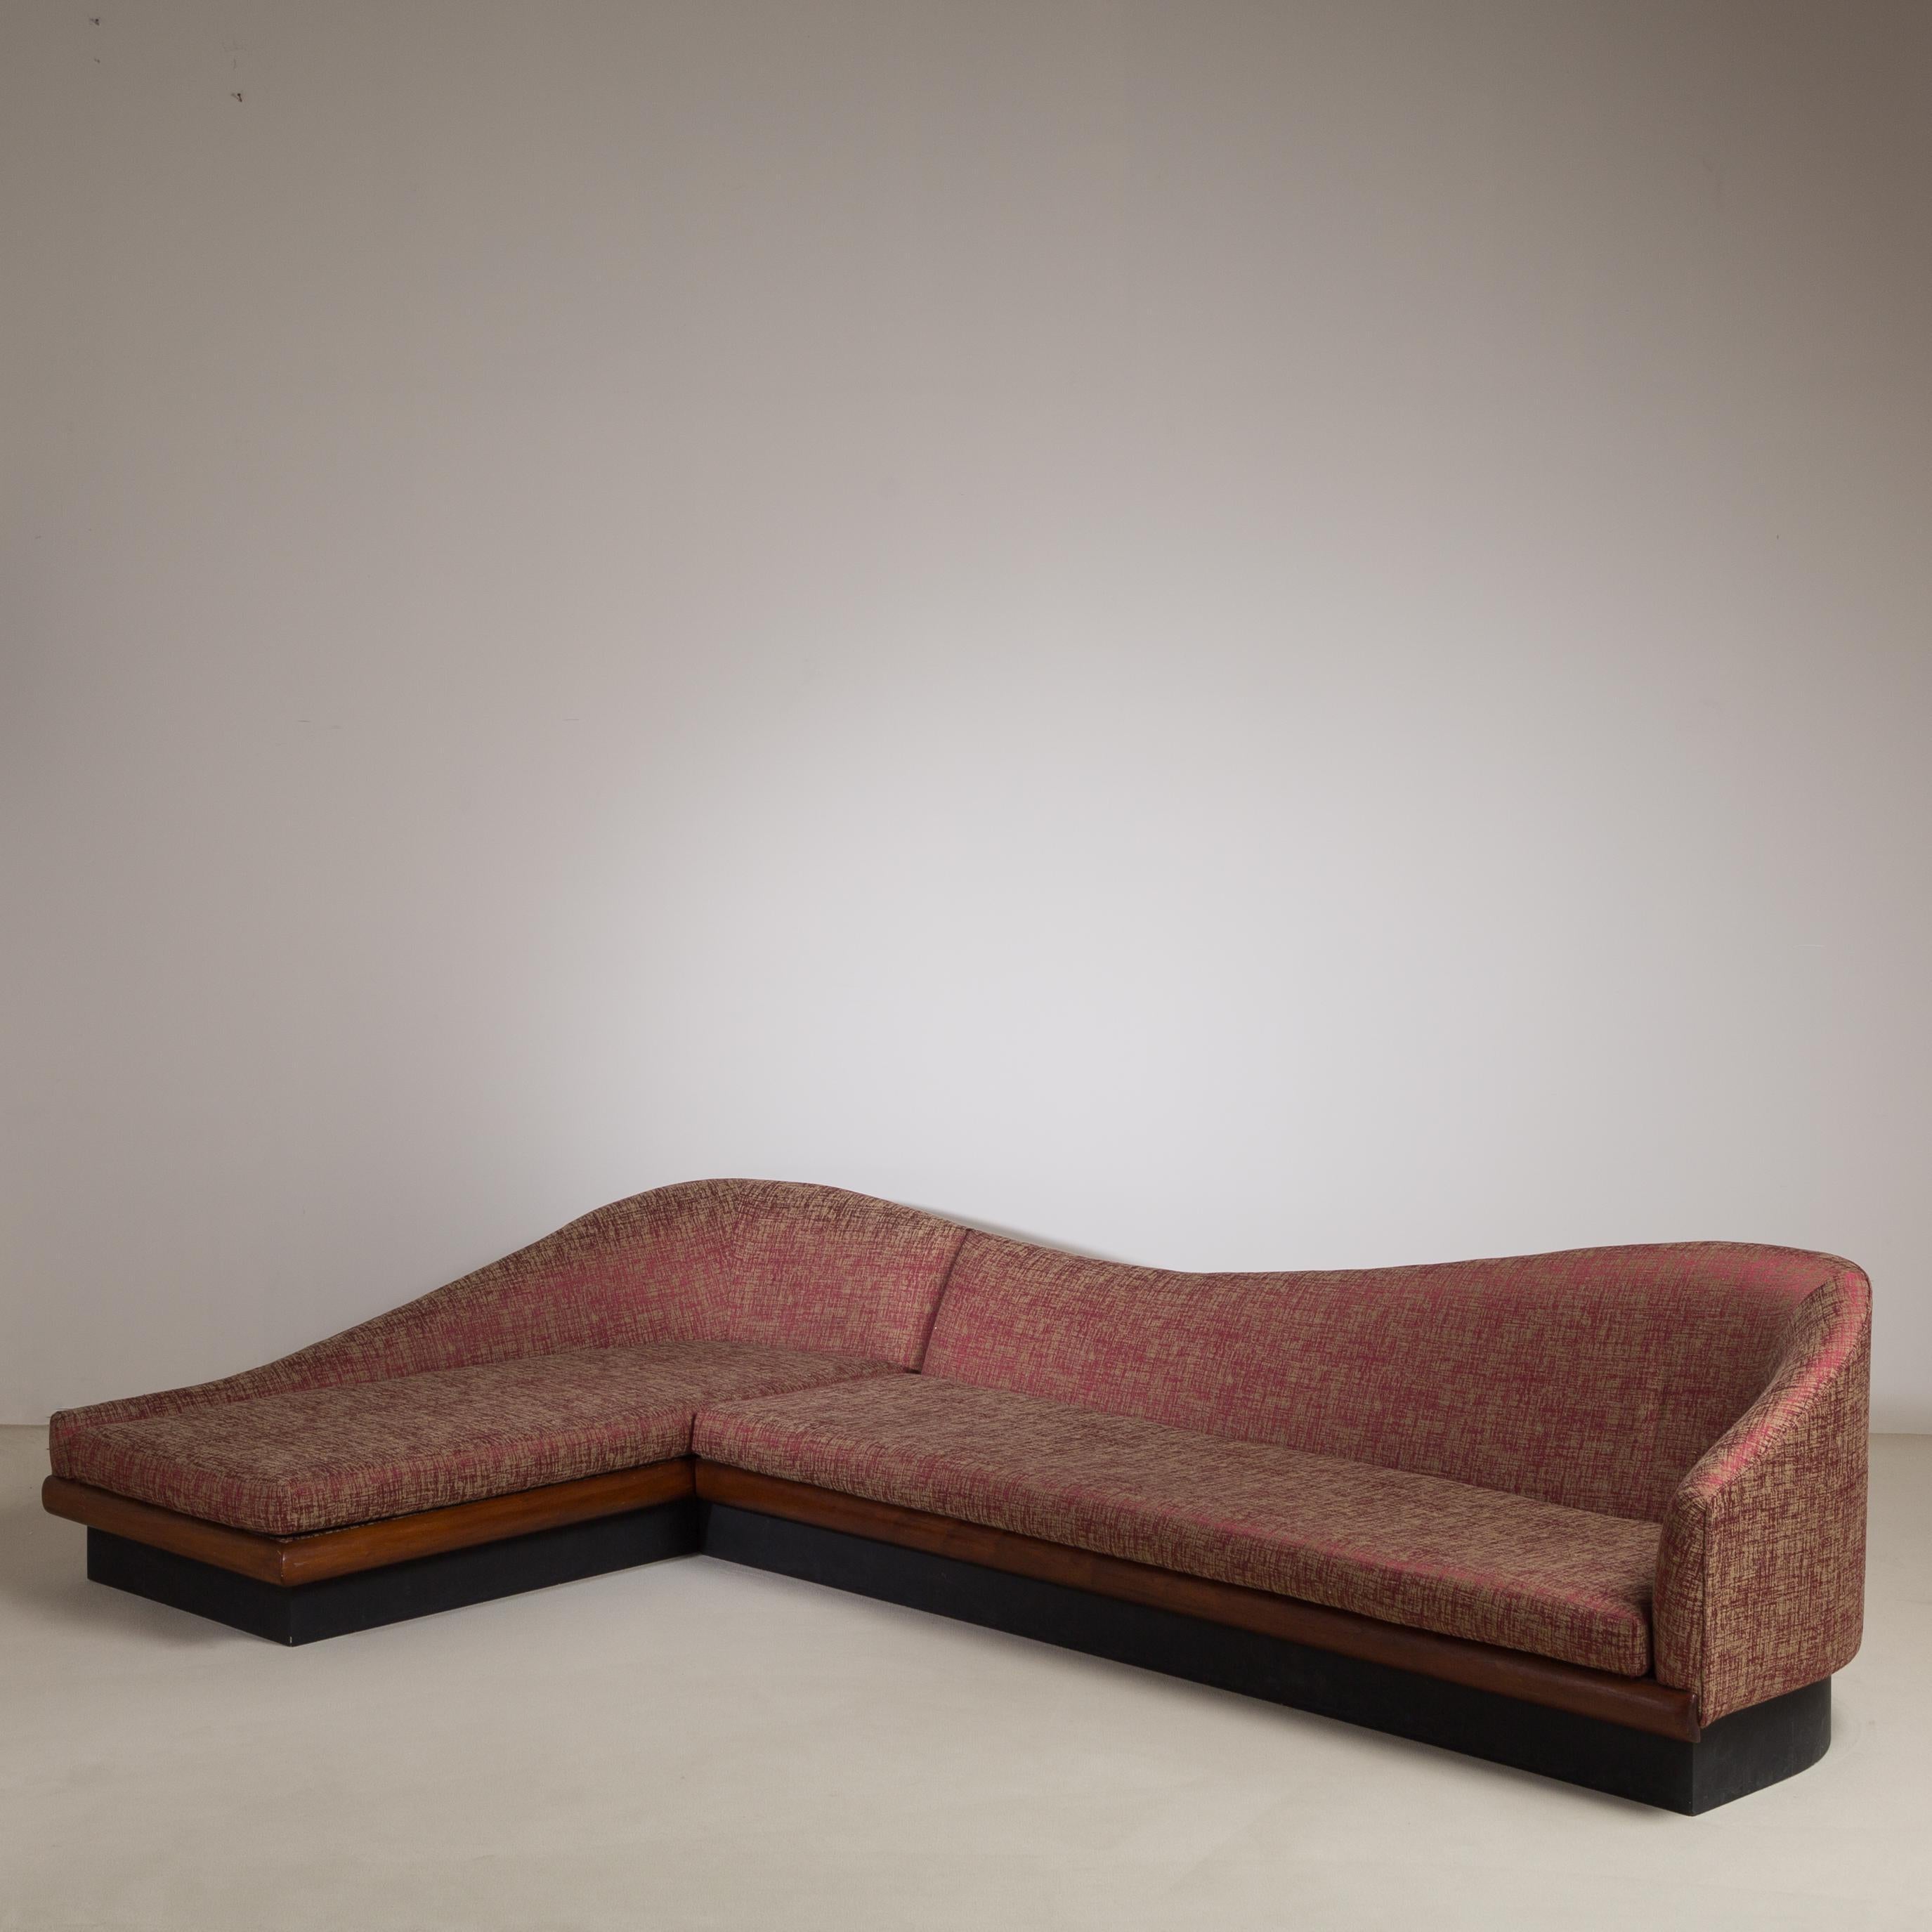 A curved two-part sectional Cloud sofa by Adrian Pearsall for Craft Associates, USA, 1950s. Set on a floating walnut base. In good vintage condition with new re-upholstery.   Please contact us if you are interested in recovering the sofa with your